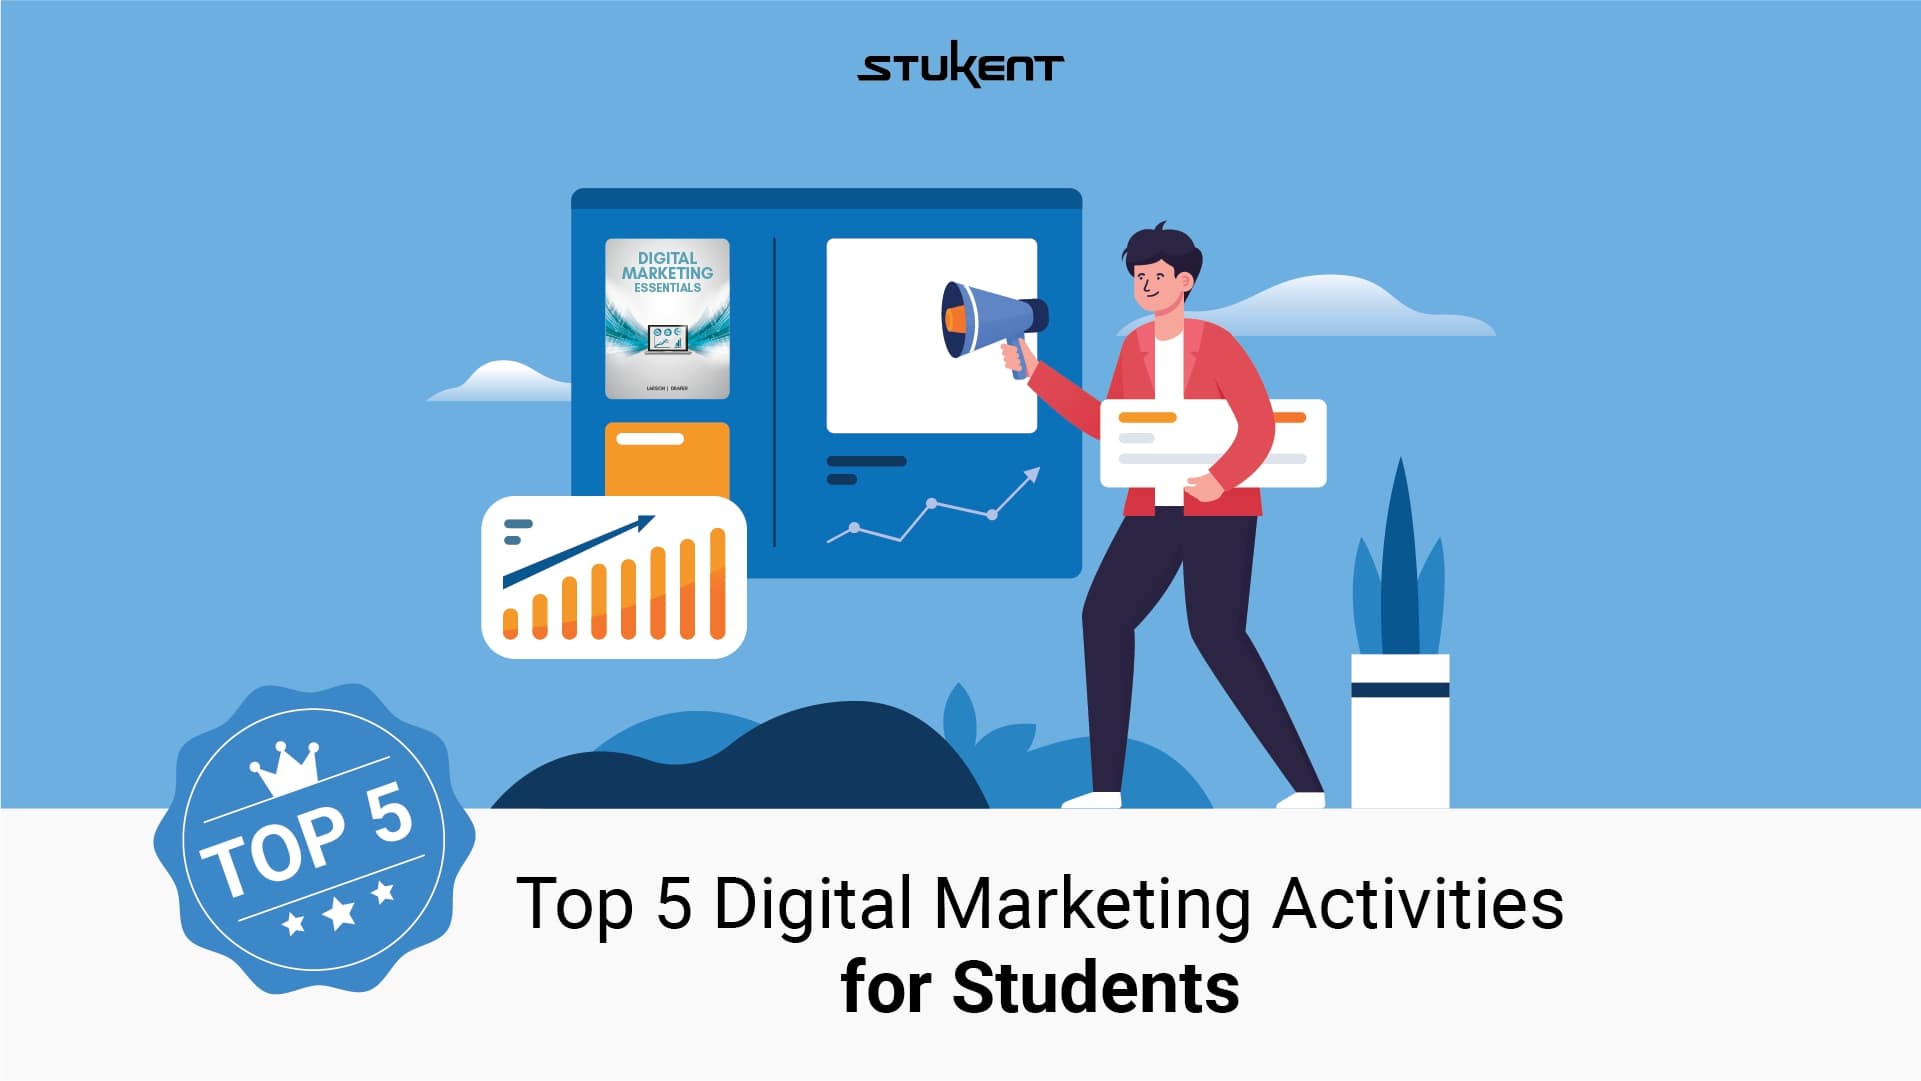 Top 5 Digital Marketing Activities for Students Image